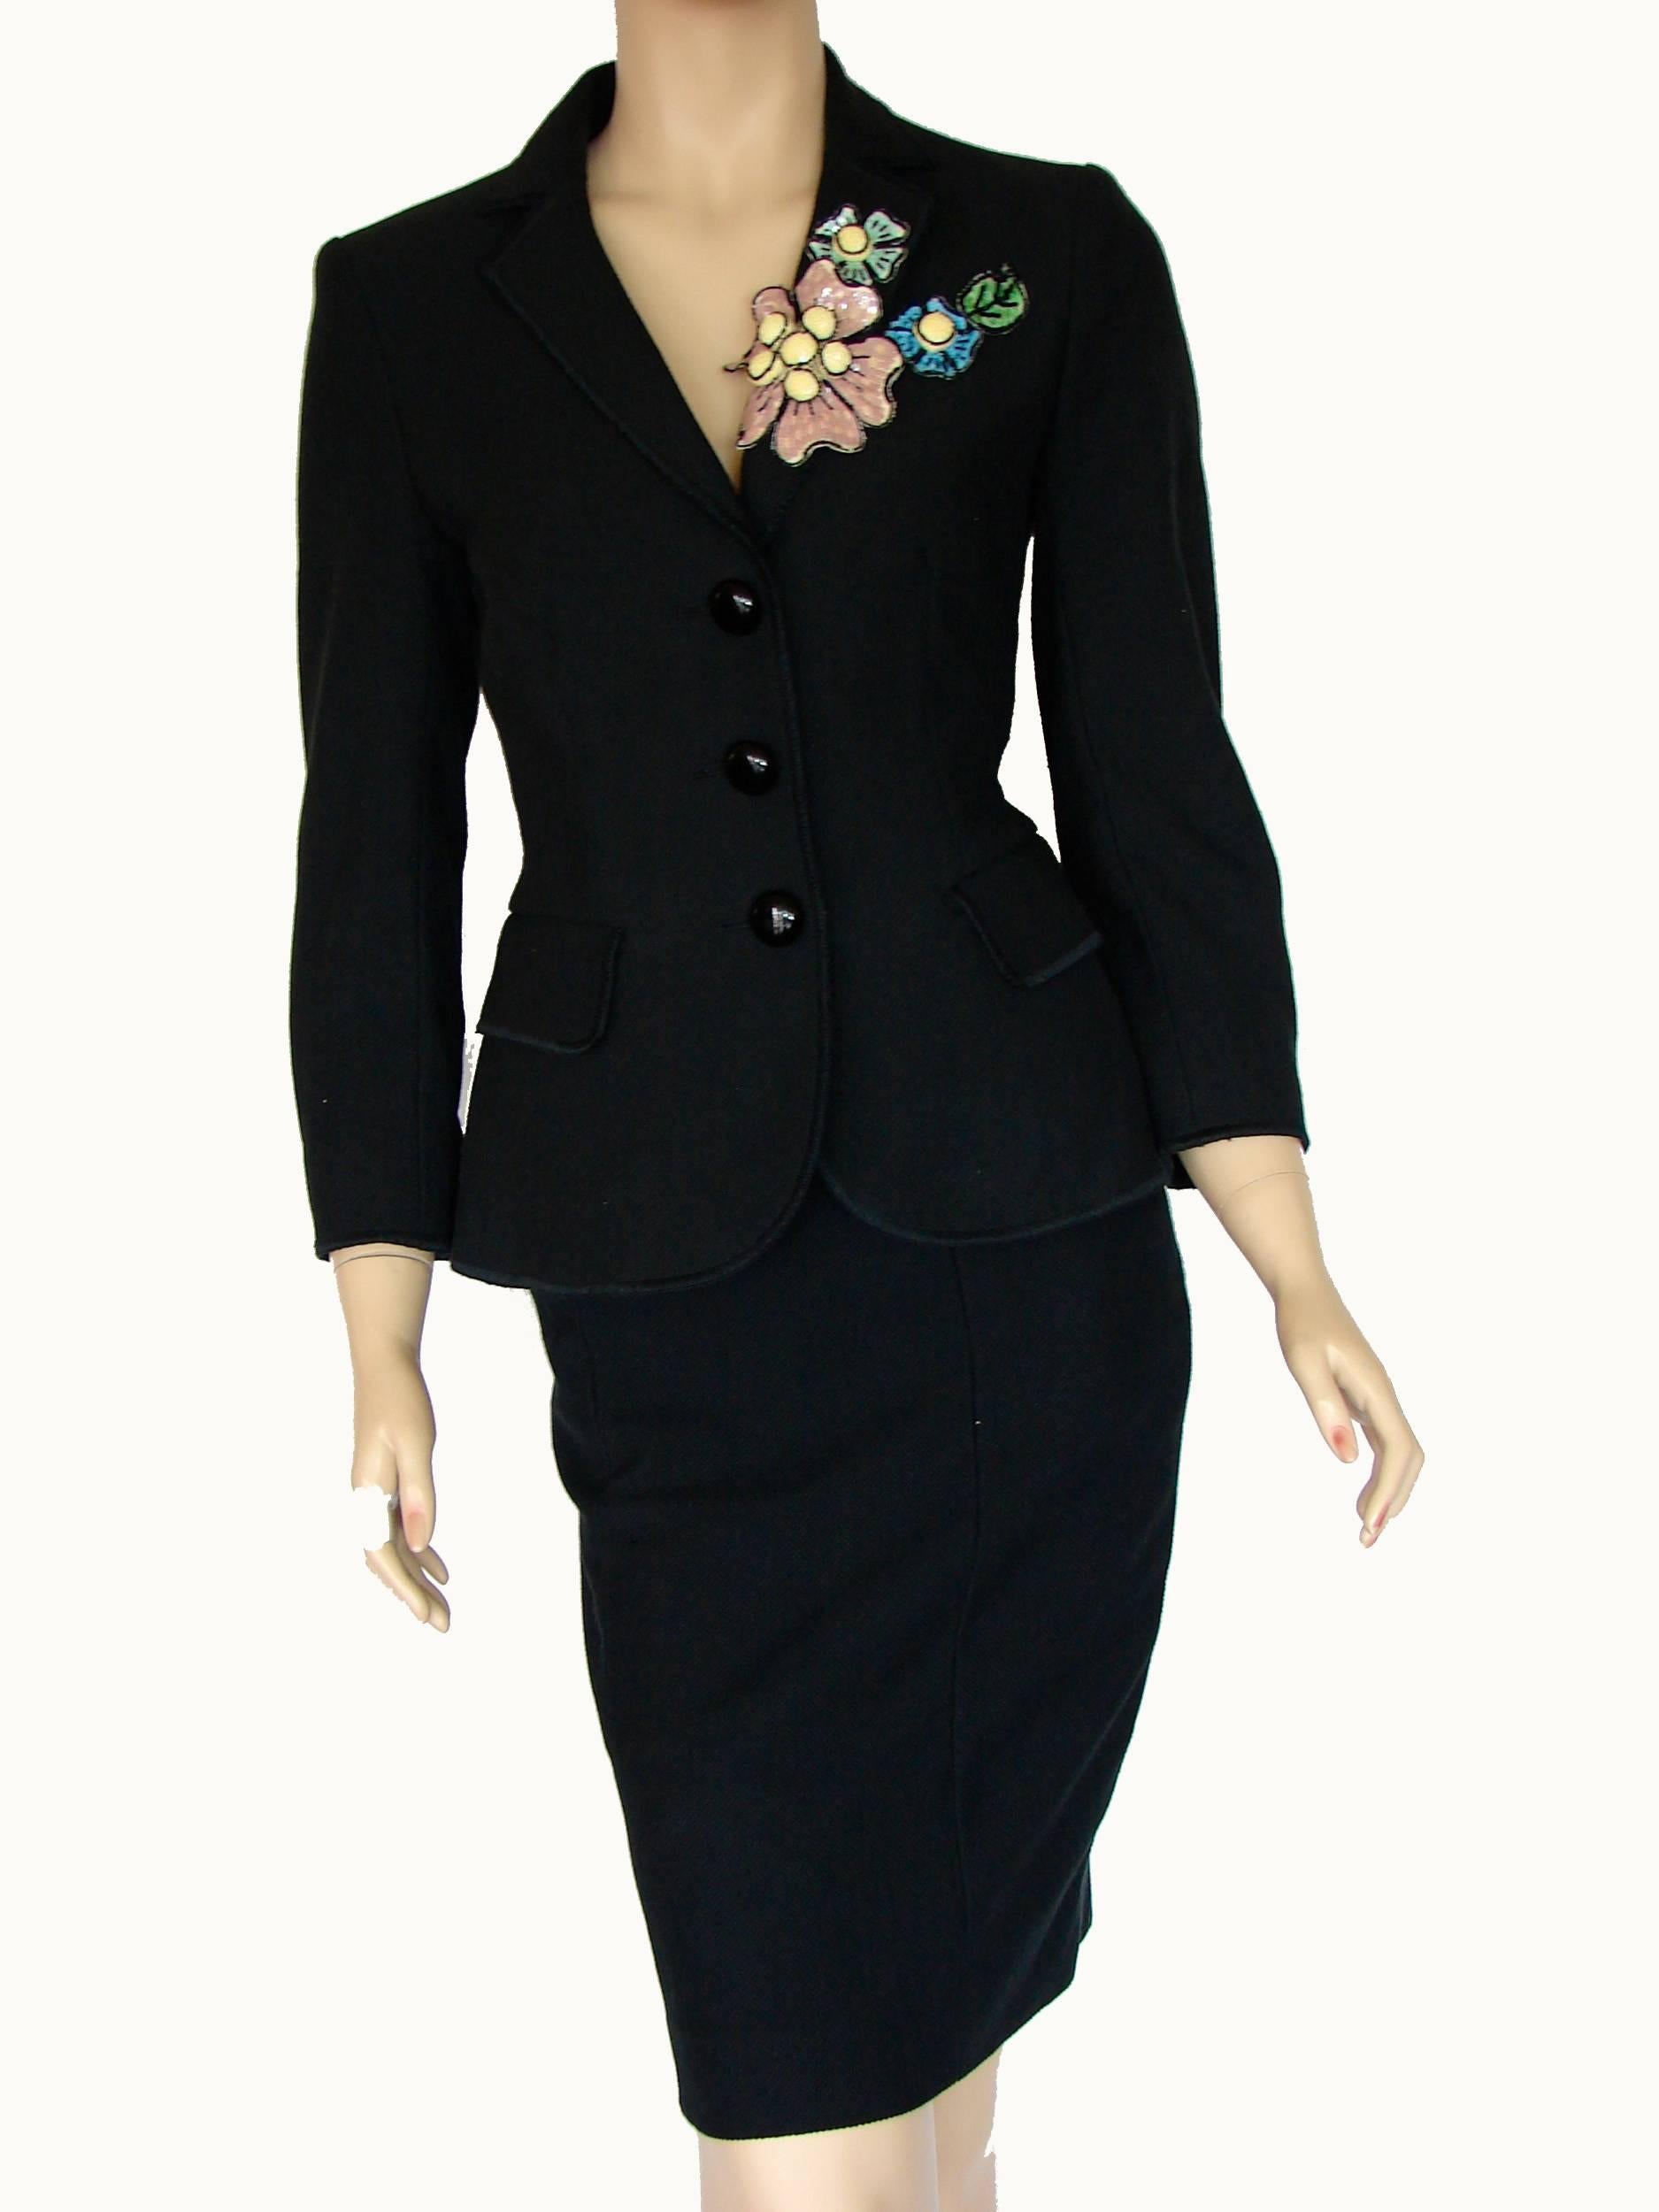 Moschino Cheap & Chic Black Jacket & Skirt Suit Sequin Corsage US Size 4/6 2